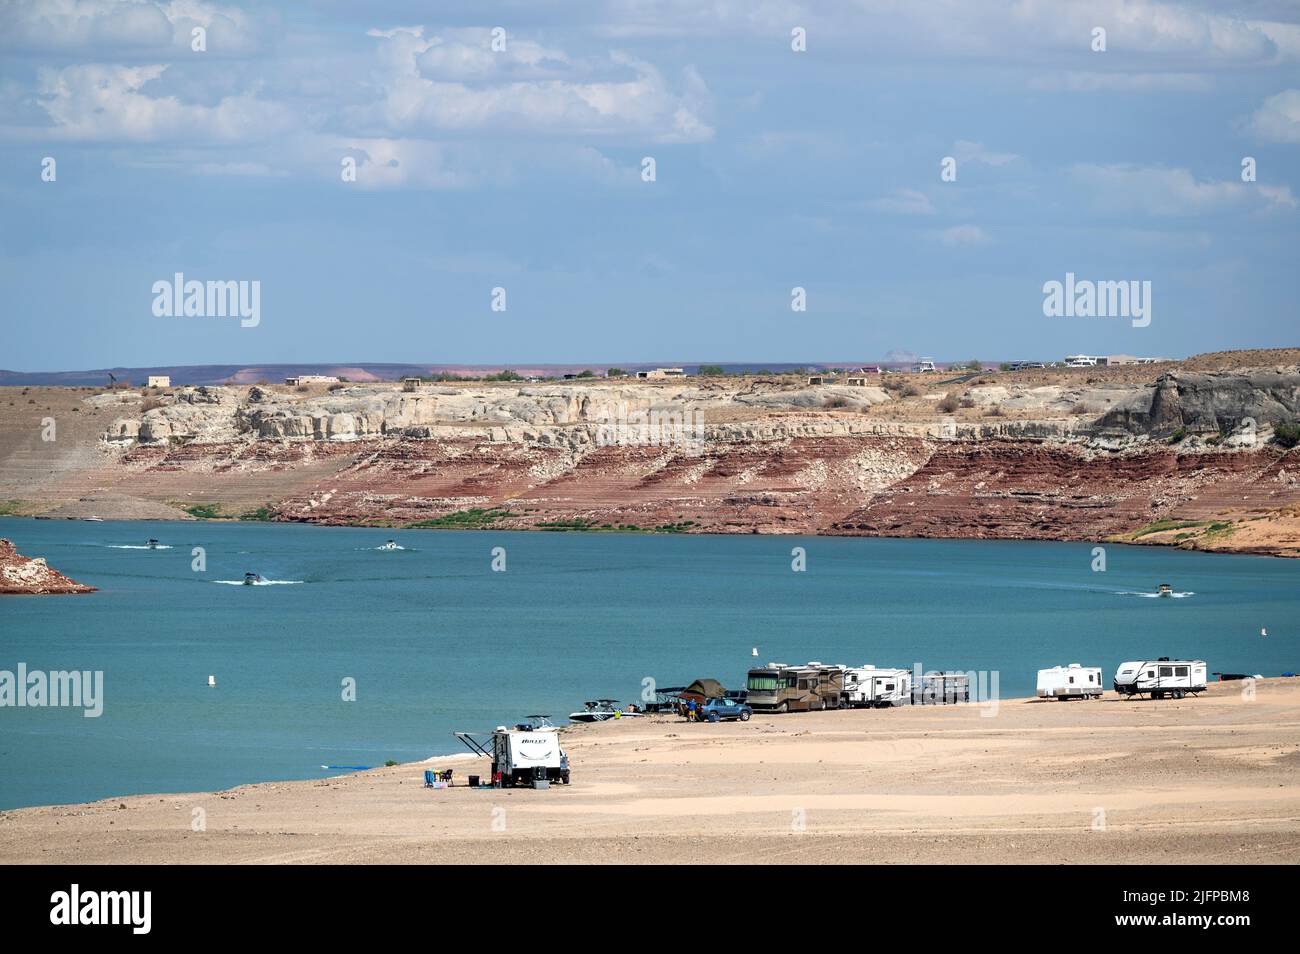 June 30, 2022 - Glen Canyon National Recreation Area, Utah, U.S. - People camp at an area of Lake Powell that used to be underwater is now dry at Lone Rock Beach on June 30, 2022 in Big Water, Utah. As severe drought grips parts of the Western United States, water levels at Lake Powell have dropped to their lowest levels since the lake was created by damming the Colorado River in 1963. The Colorado River Basin connects Lake Powell and Lake Mead and supplies water to 40 million people in seven western states. (Credit Image: © David Becker/ZUMA Press Wire) Stock Photo